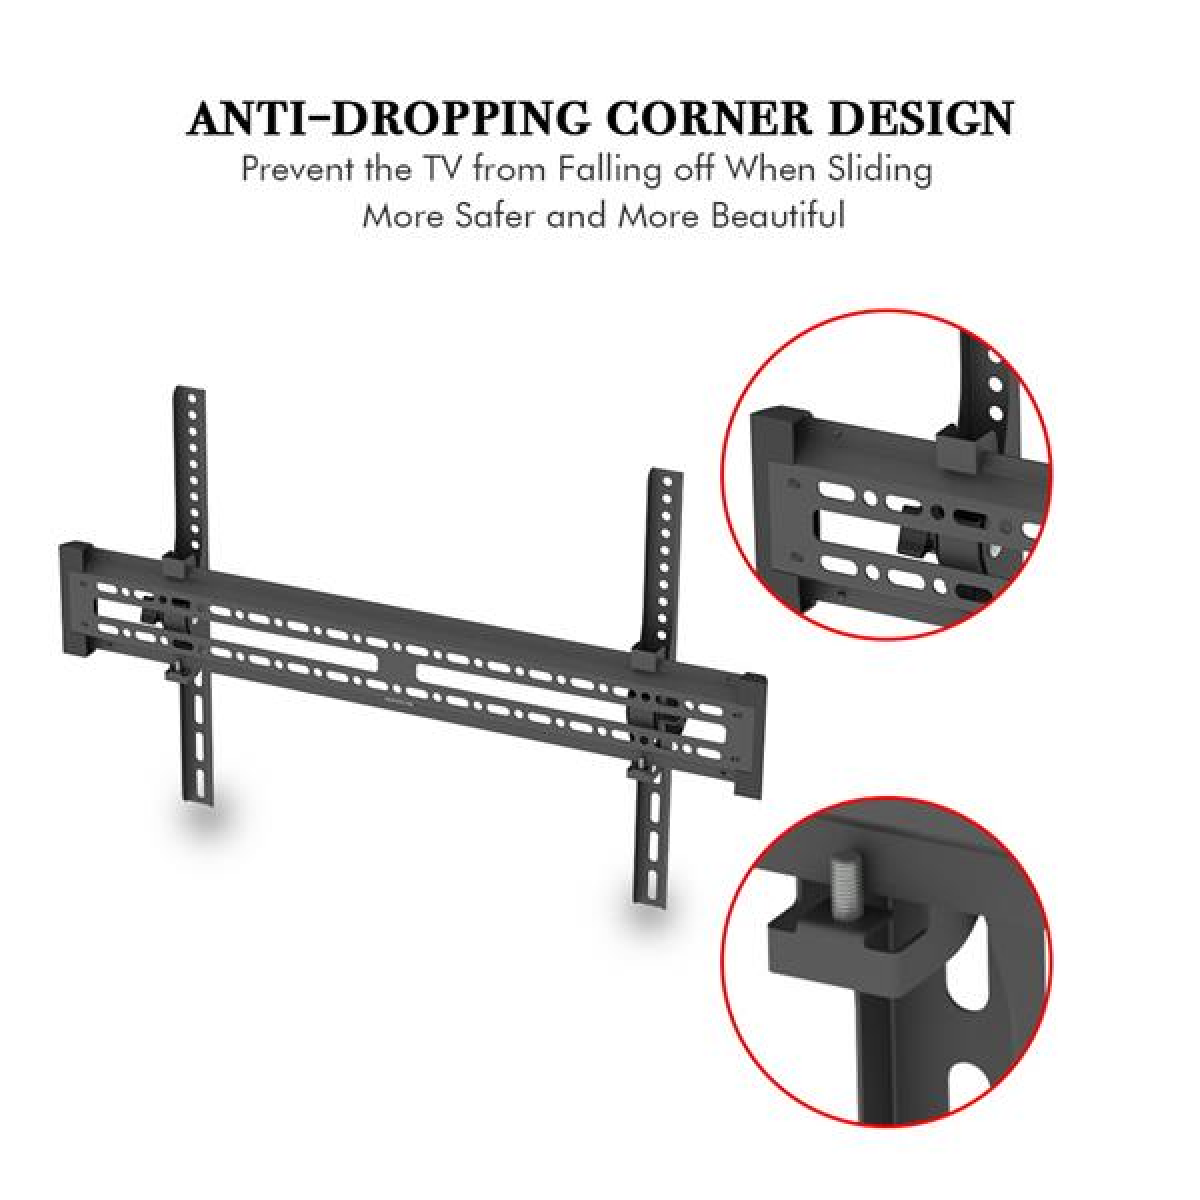 Clearance!Wall Mount Tv Bracket Wall Mount Bracket TV Stand Fits 32, 40, 42, 46, 50, 55, 65 Inch Plasma Flat Screen TV VESA400*600 Tv Wall Mount with Spirit Level Load Capacity 50kg,TMW003 - image 5 of 14